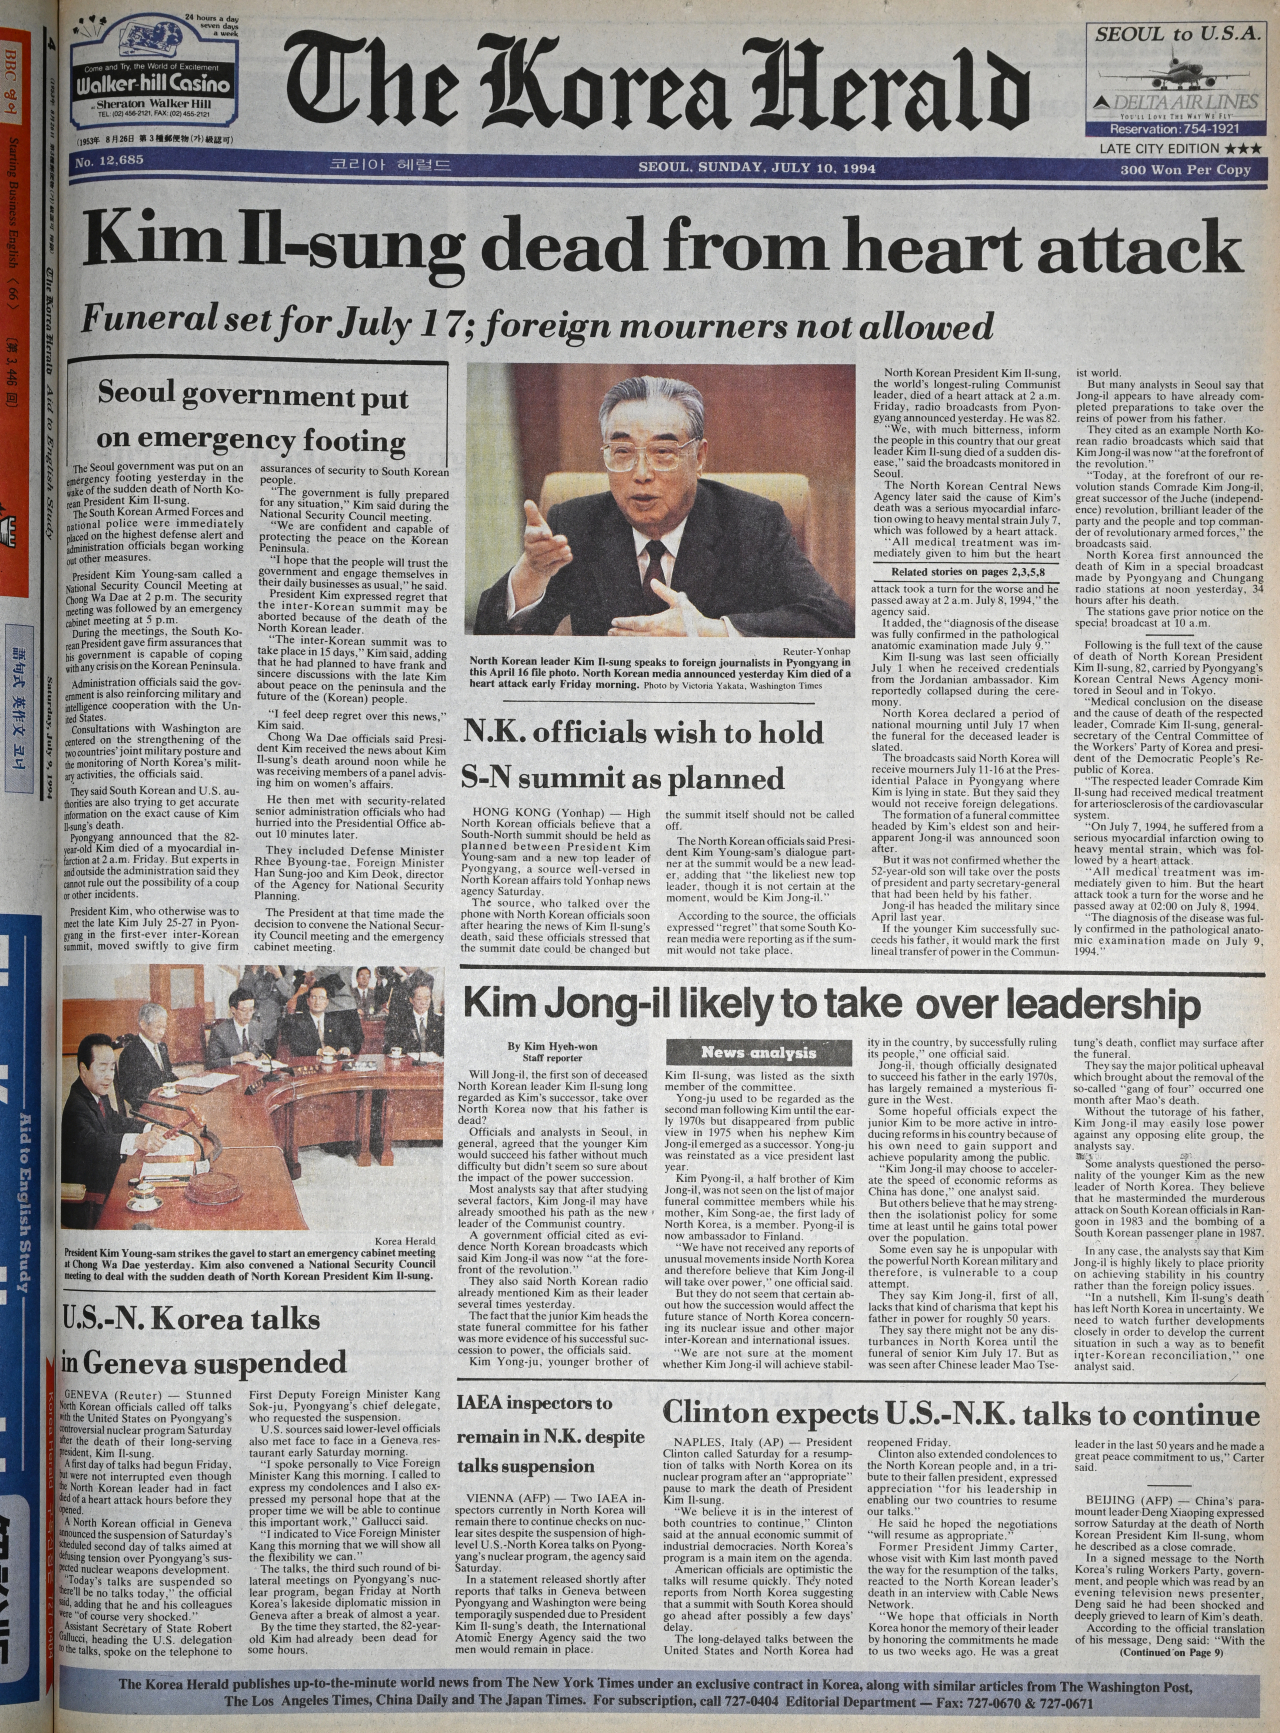 The July 10, 1994 edition of The Korea Herald